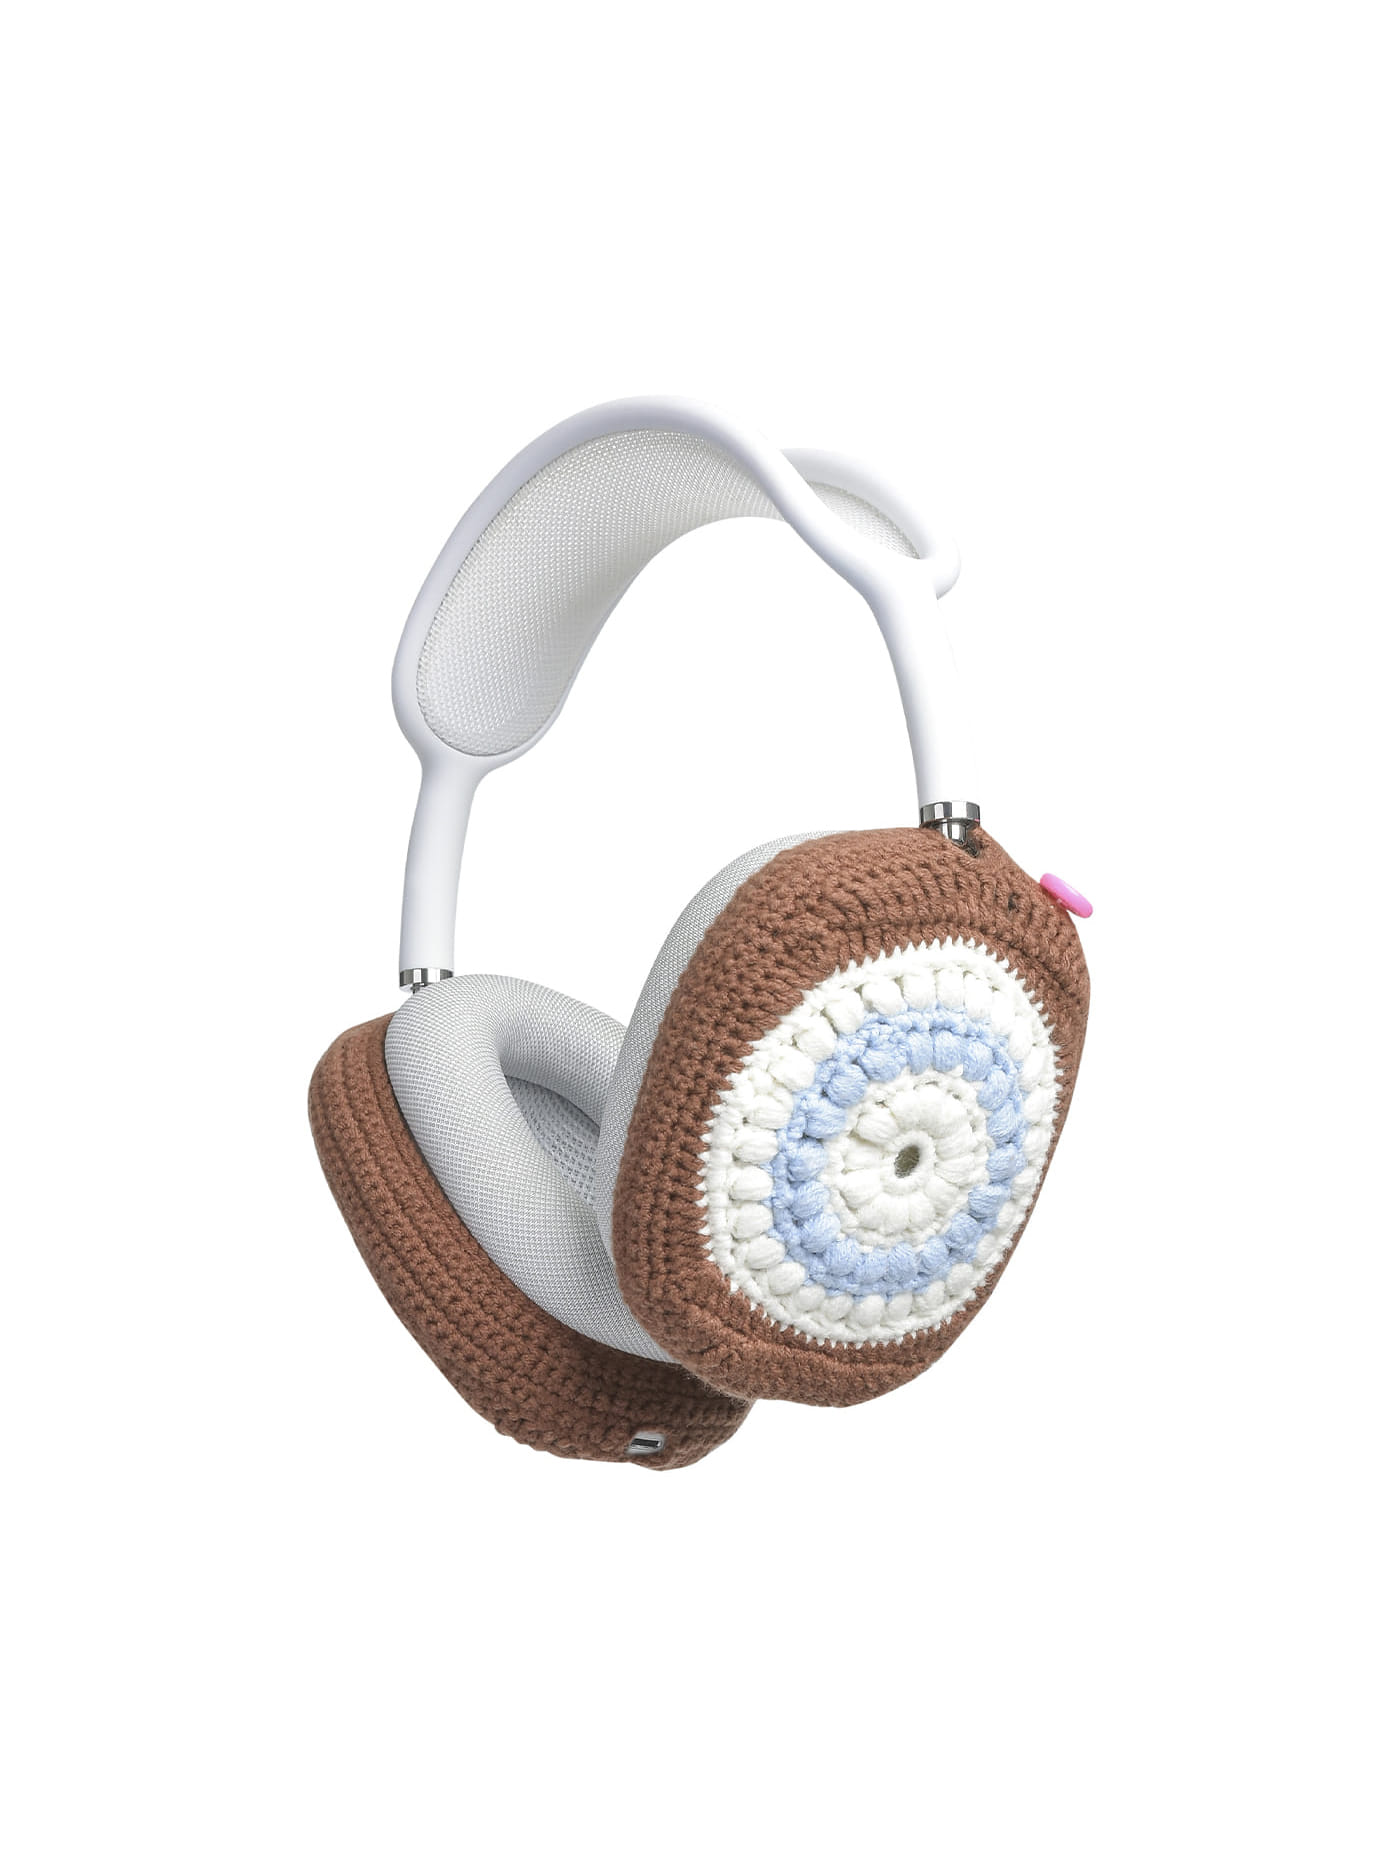 Airpods Max Case - Crochet (Brown)